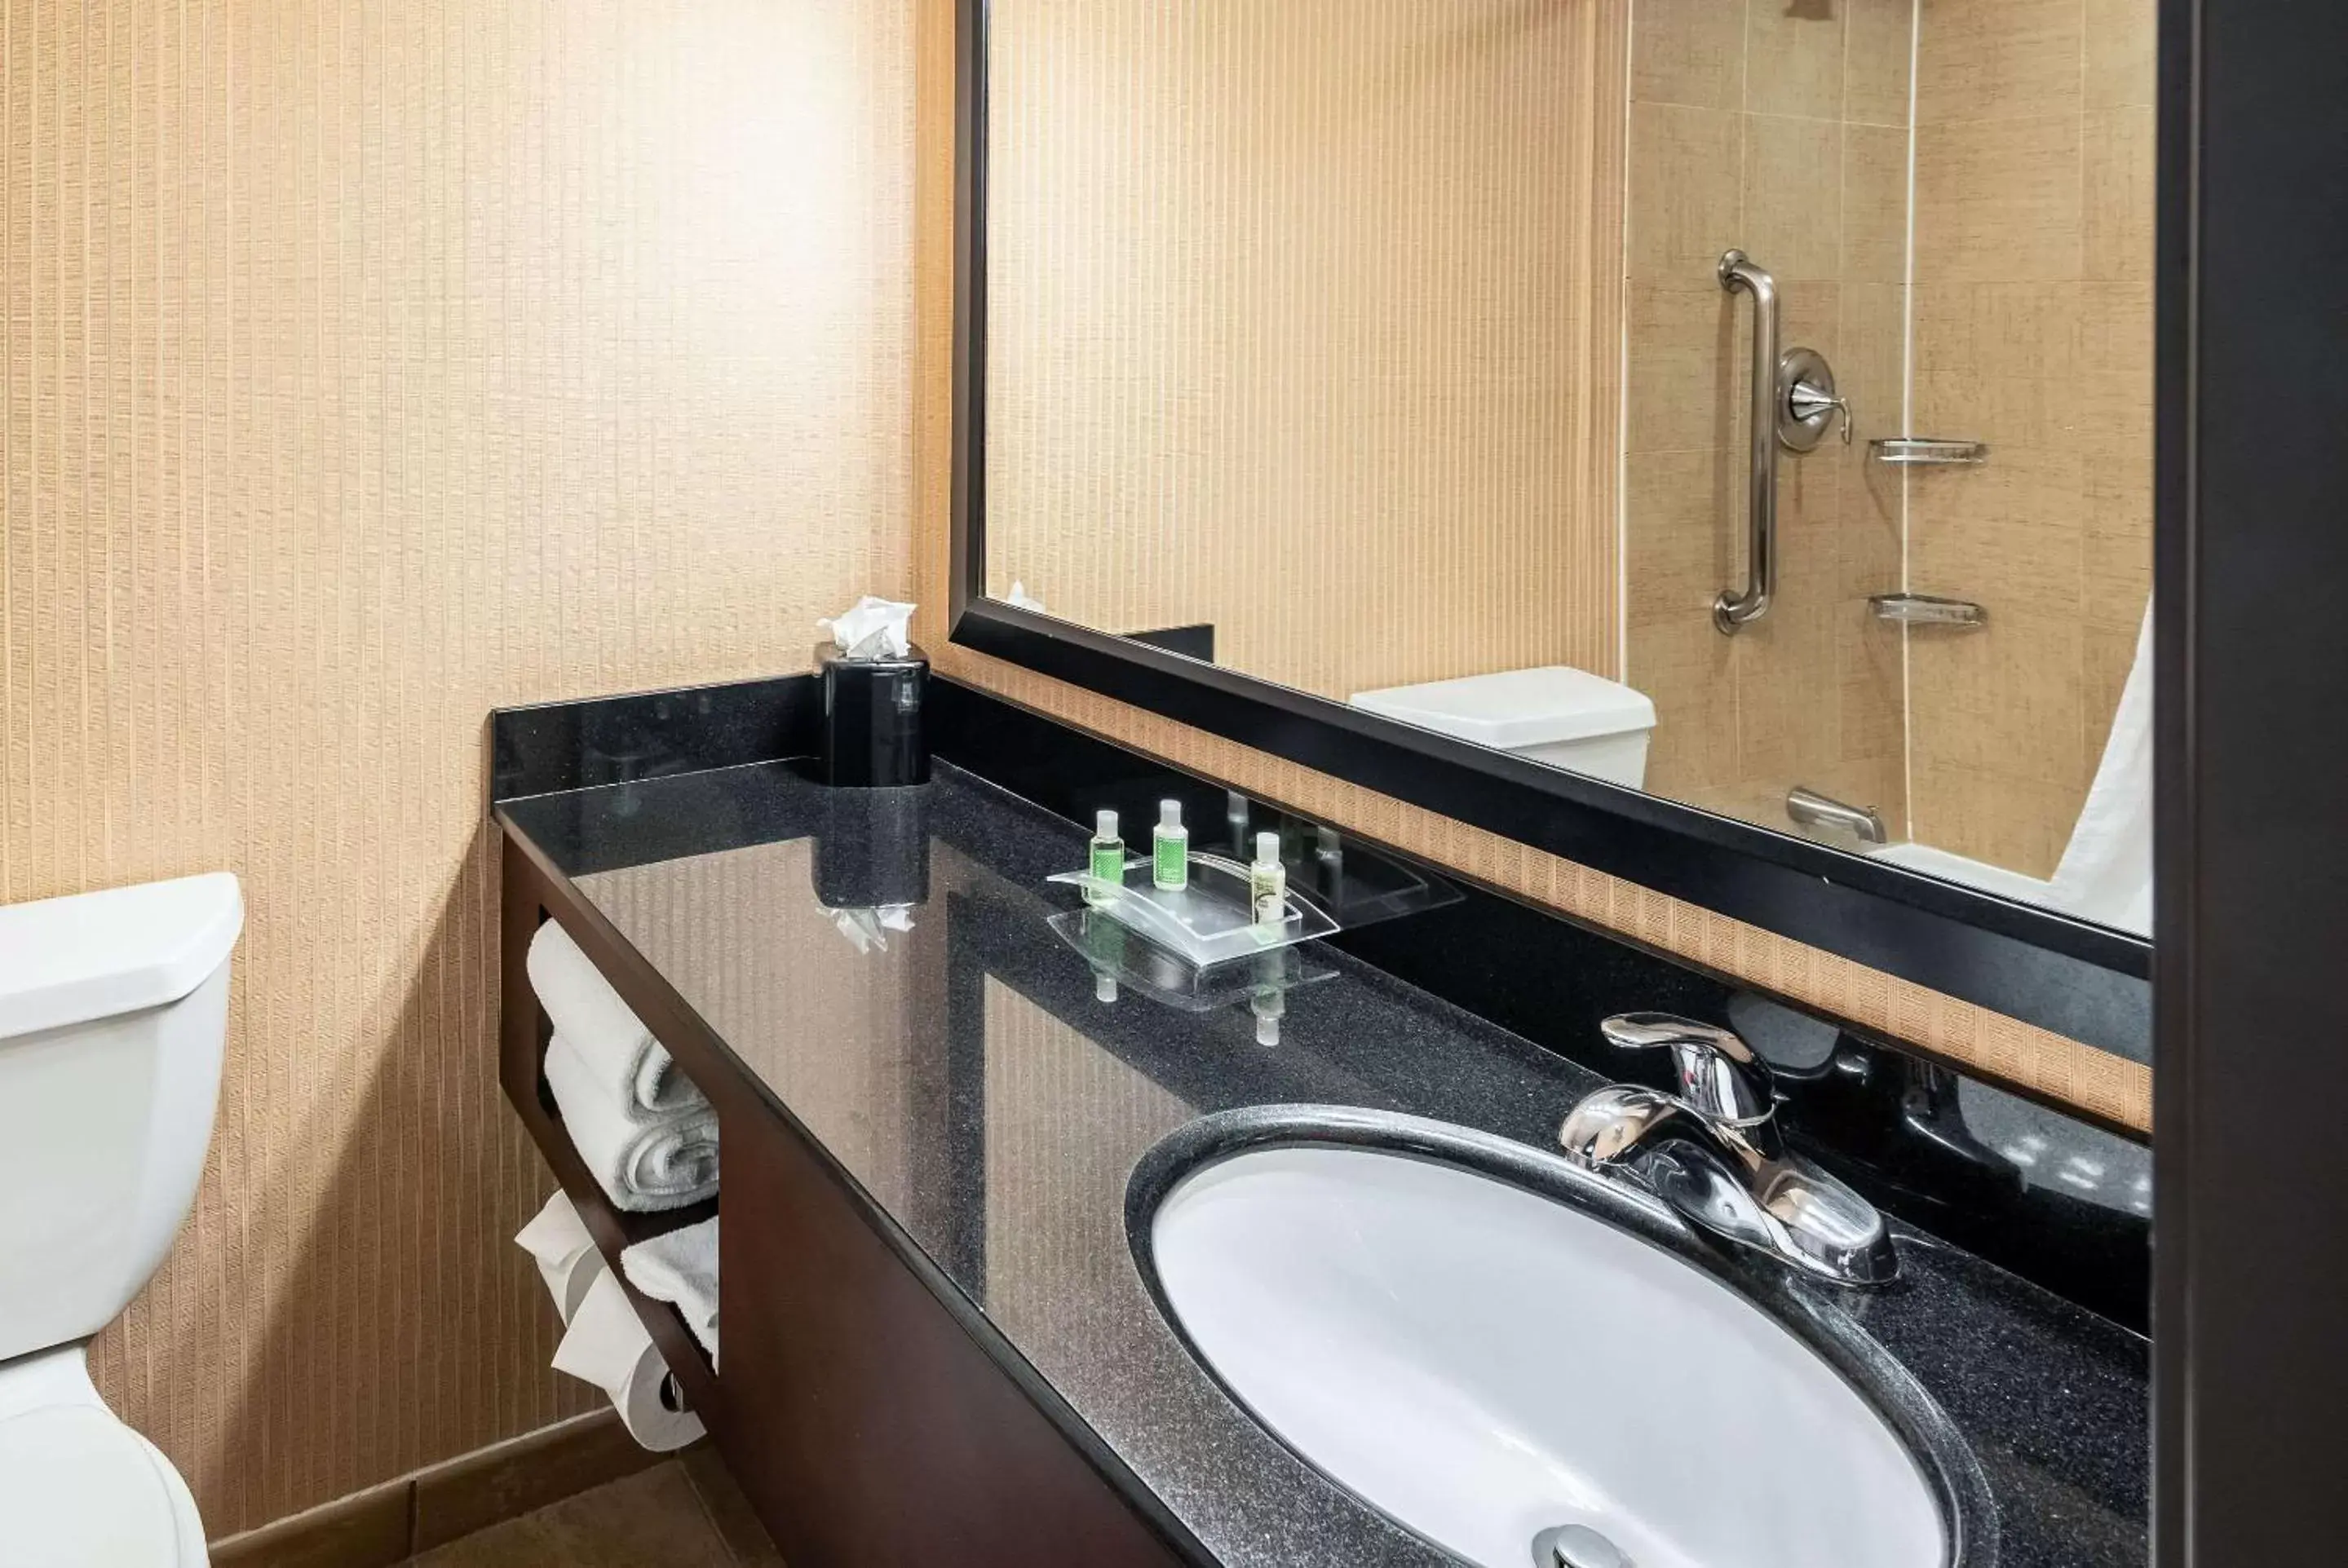 Bathroom in The Grand Hotel, Ascend Hotel Collection